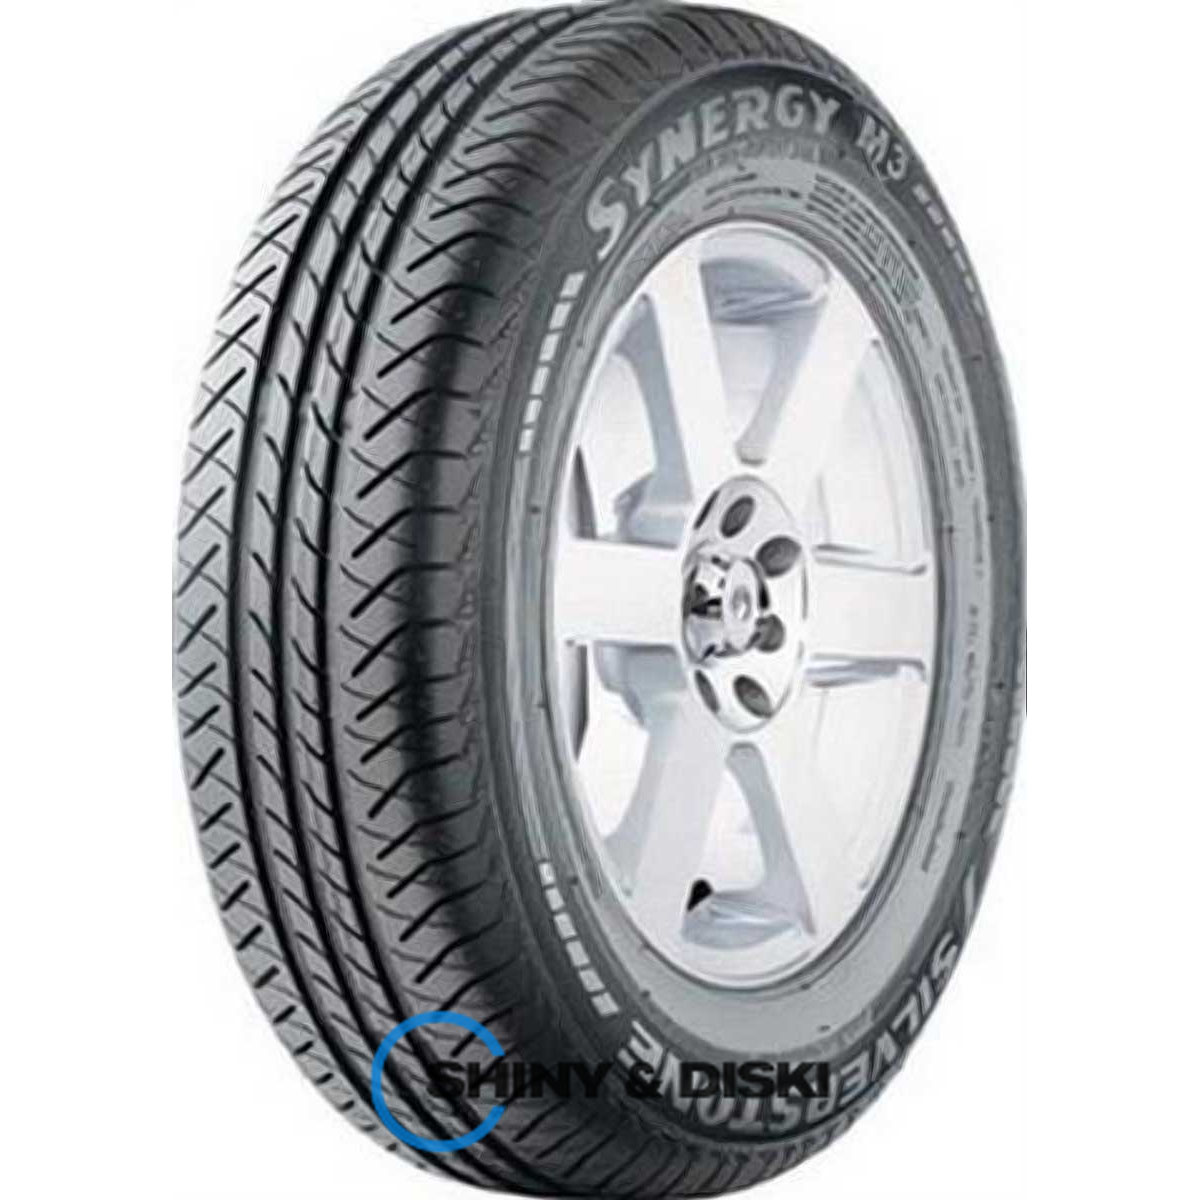 silverstone synergy m3 165/80 r13 83t